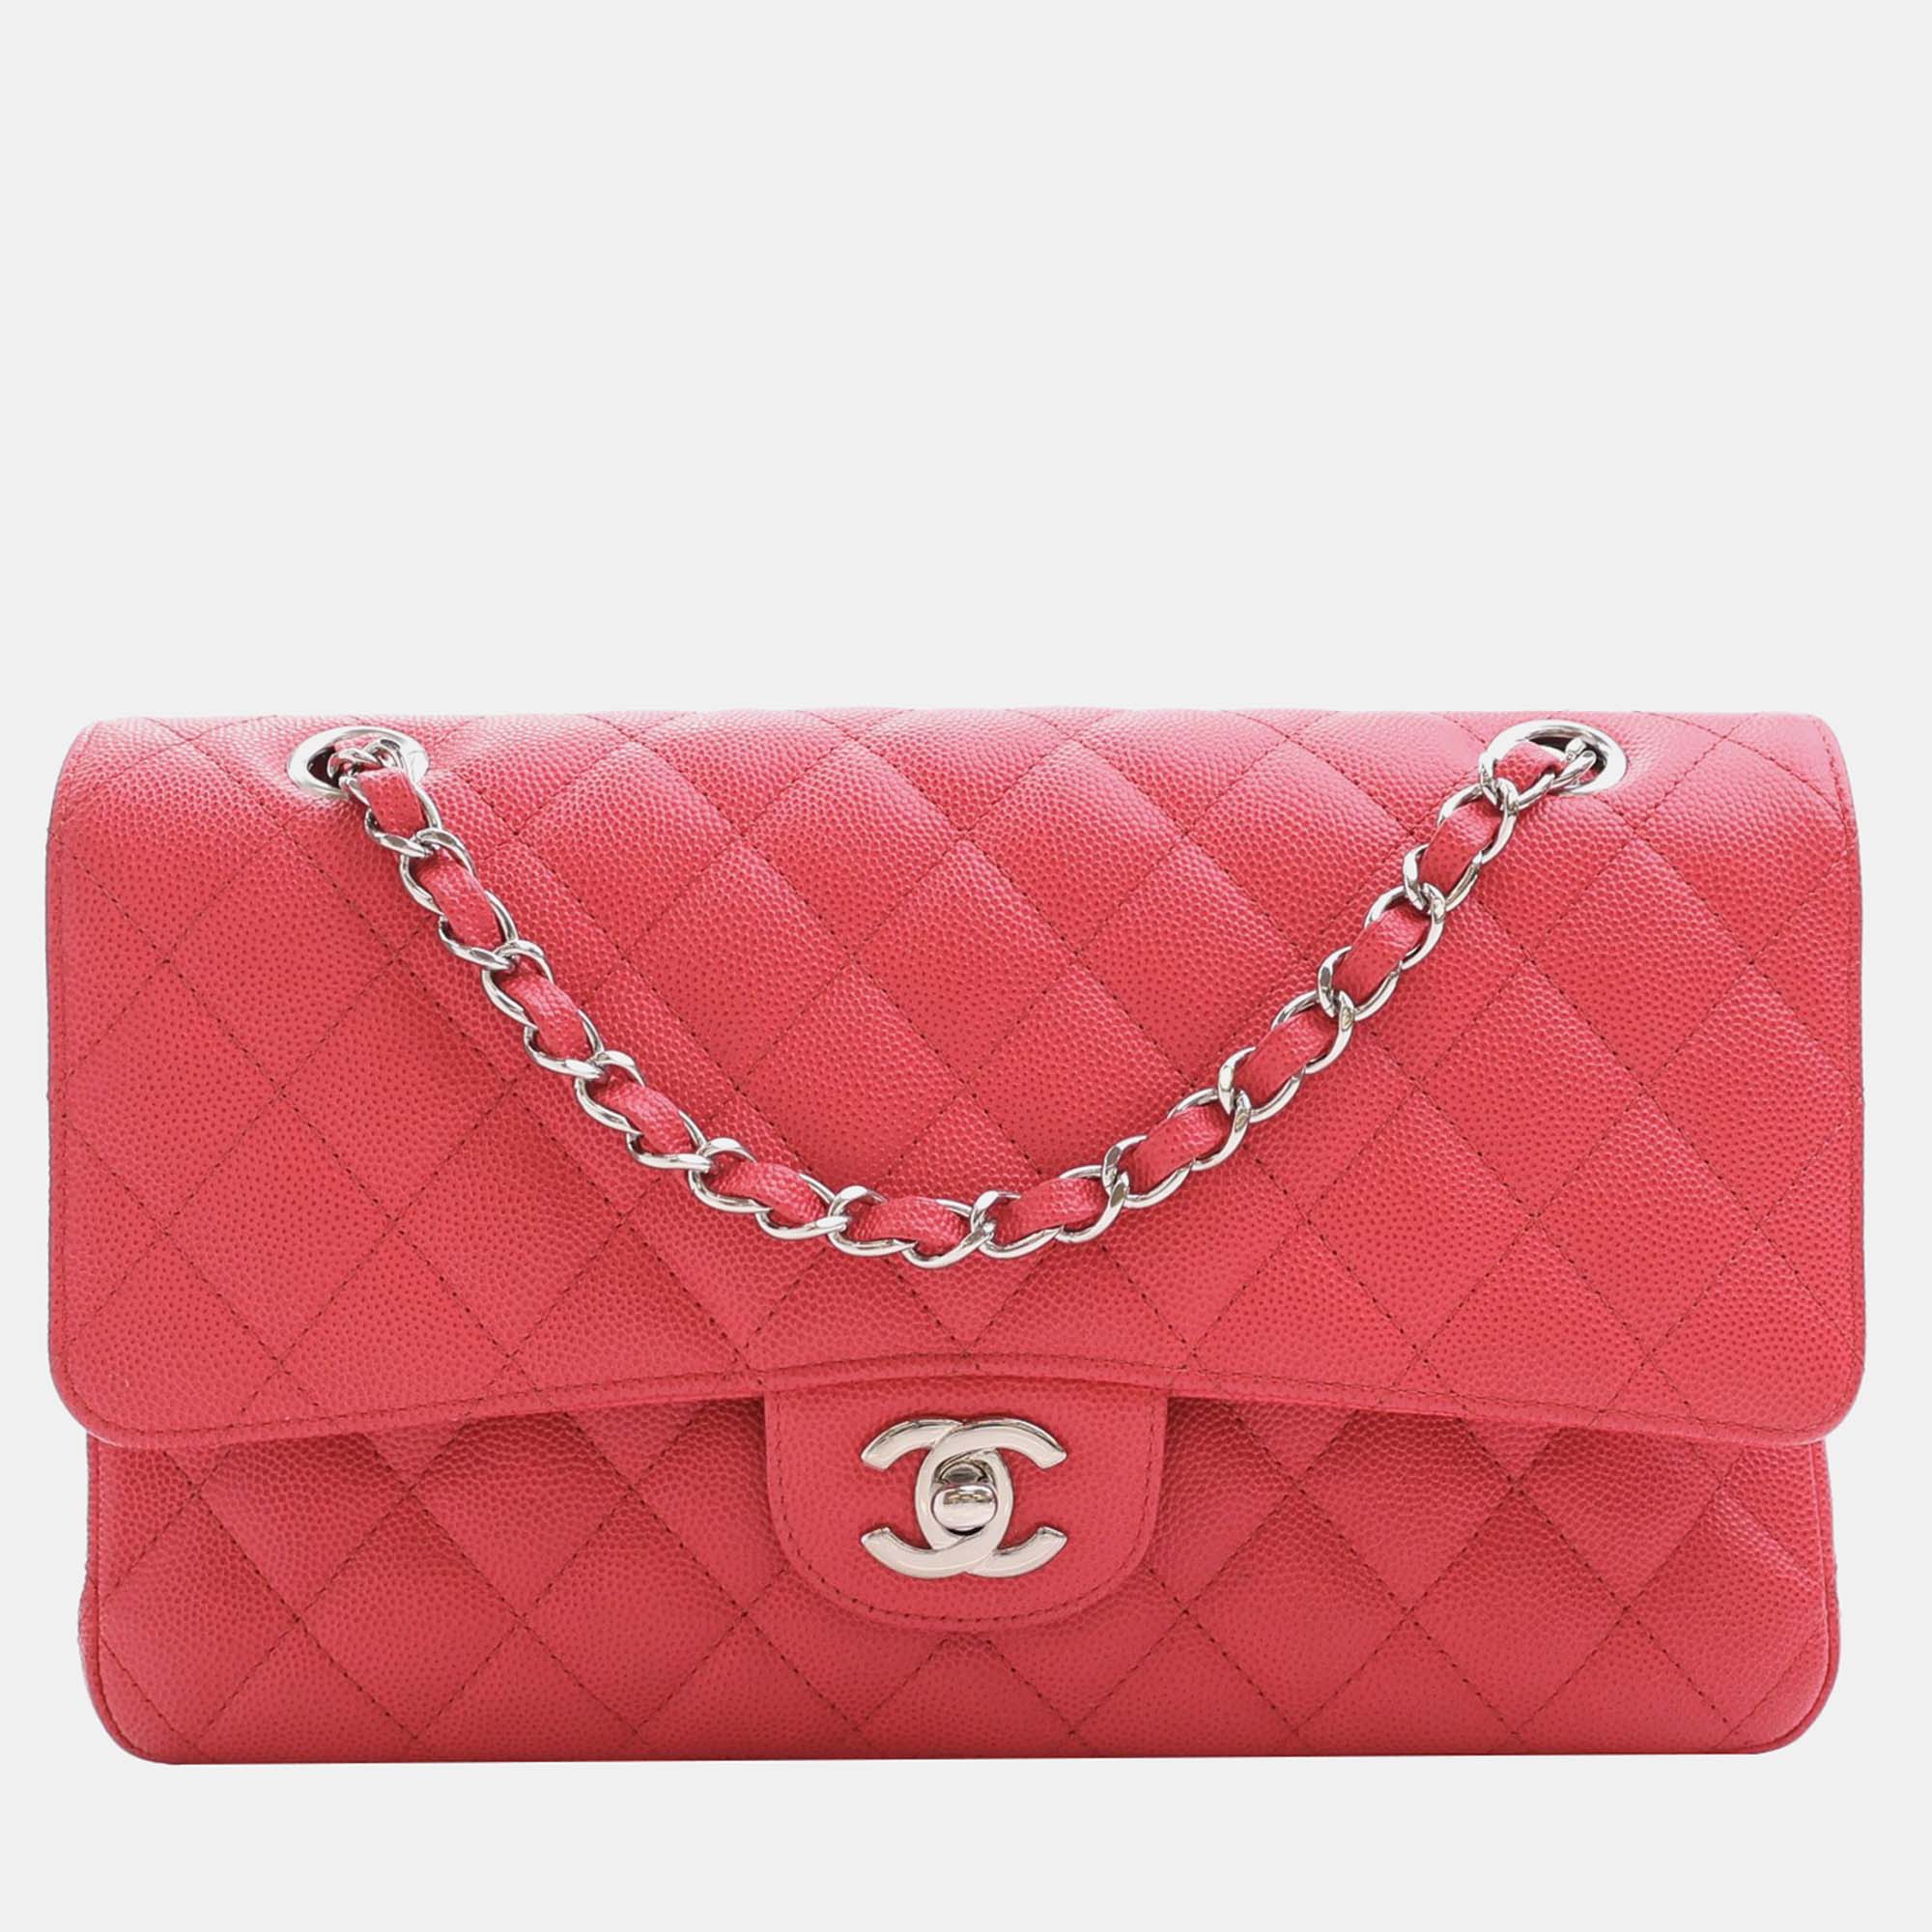 Chanel red caviar leather medium classic double flap shoulder bags